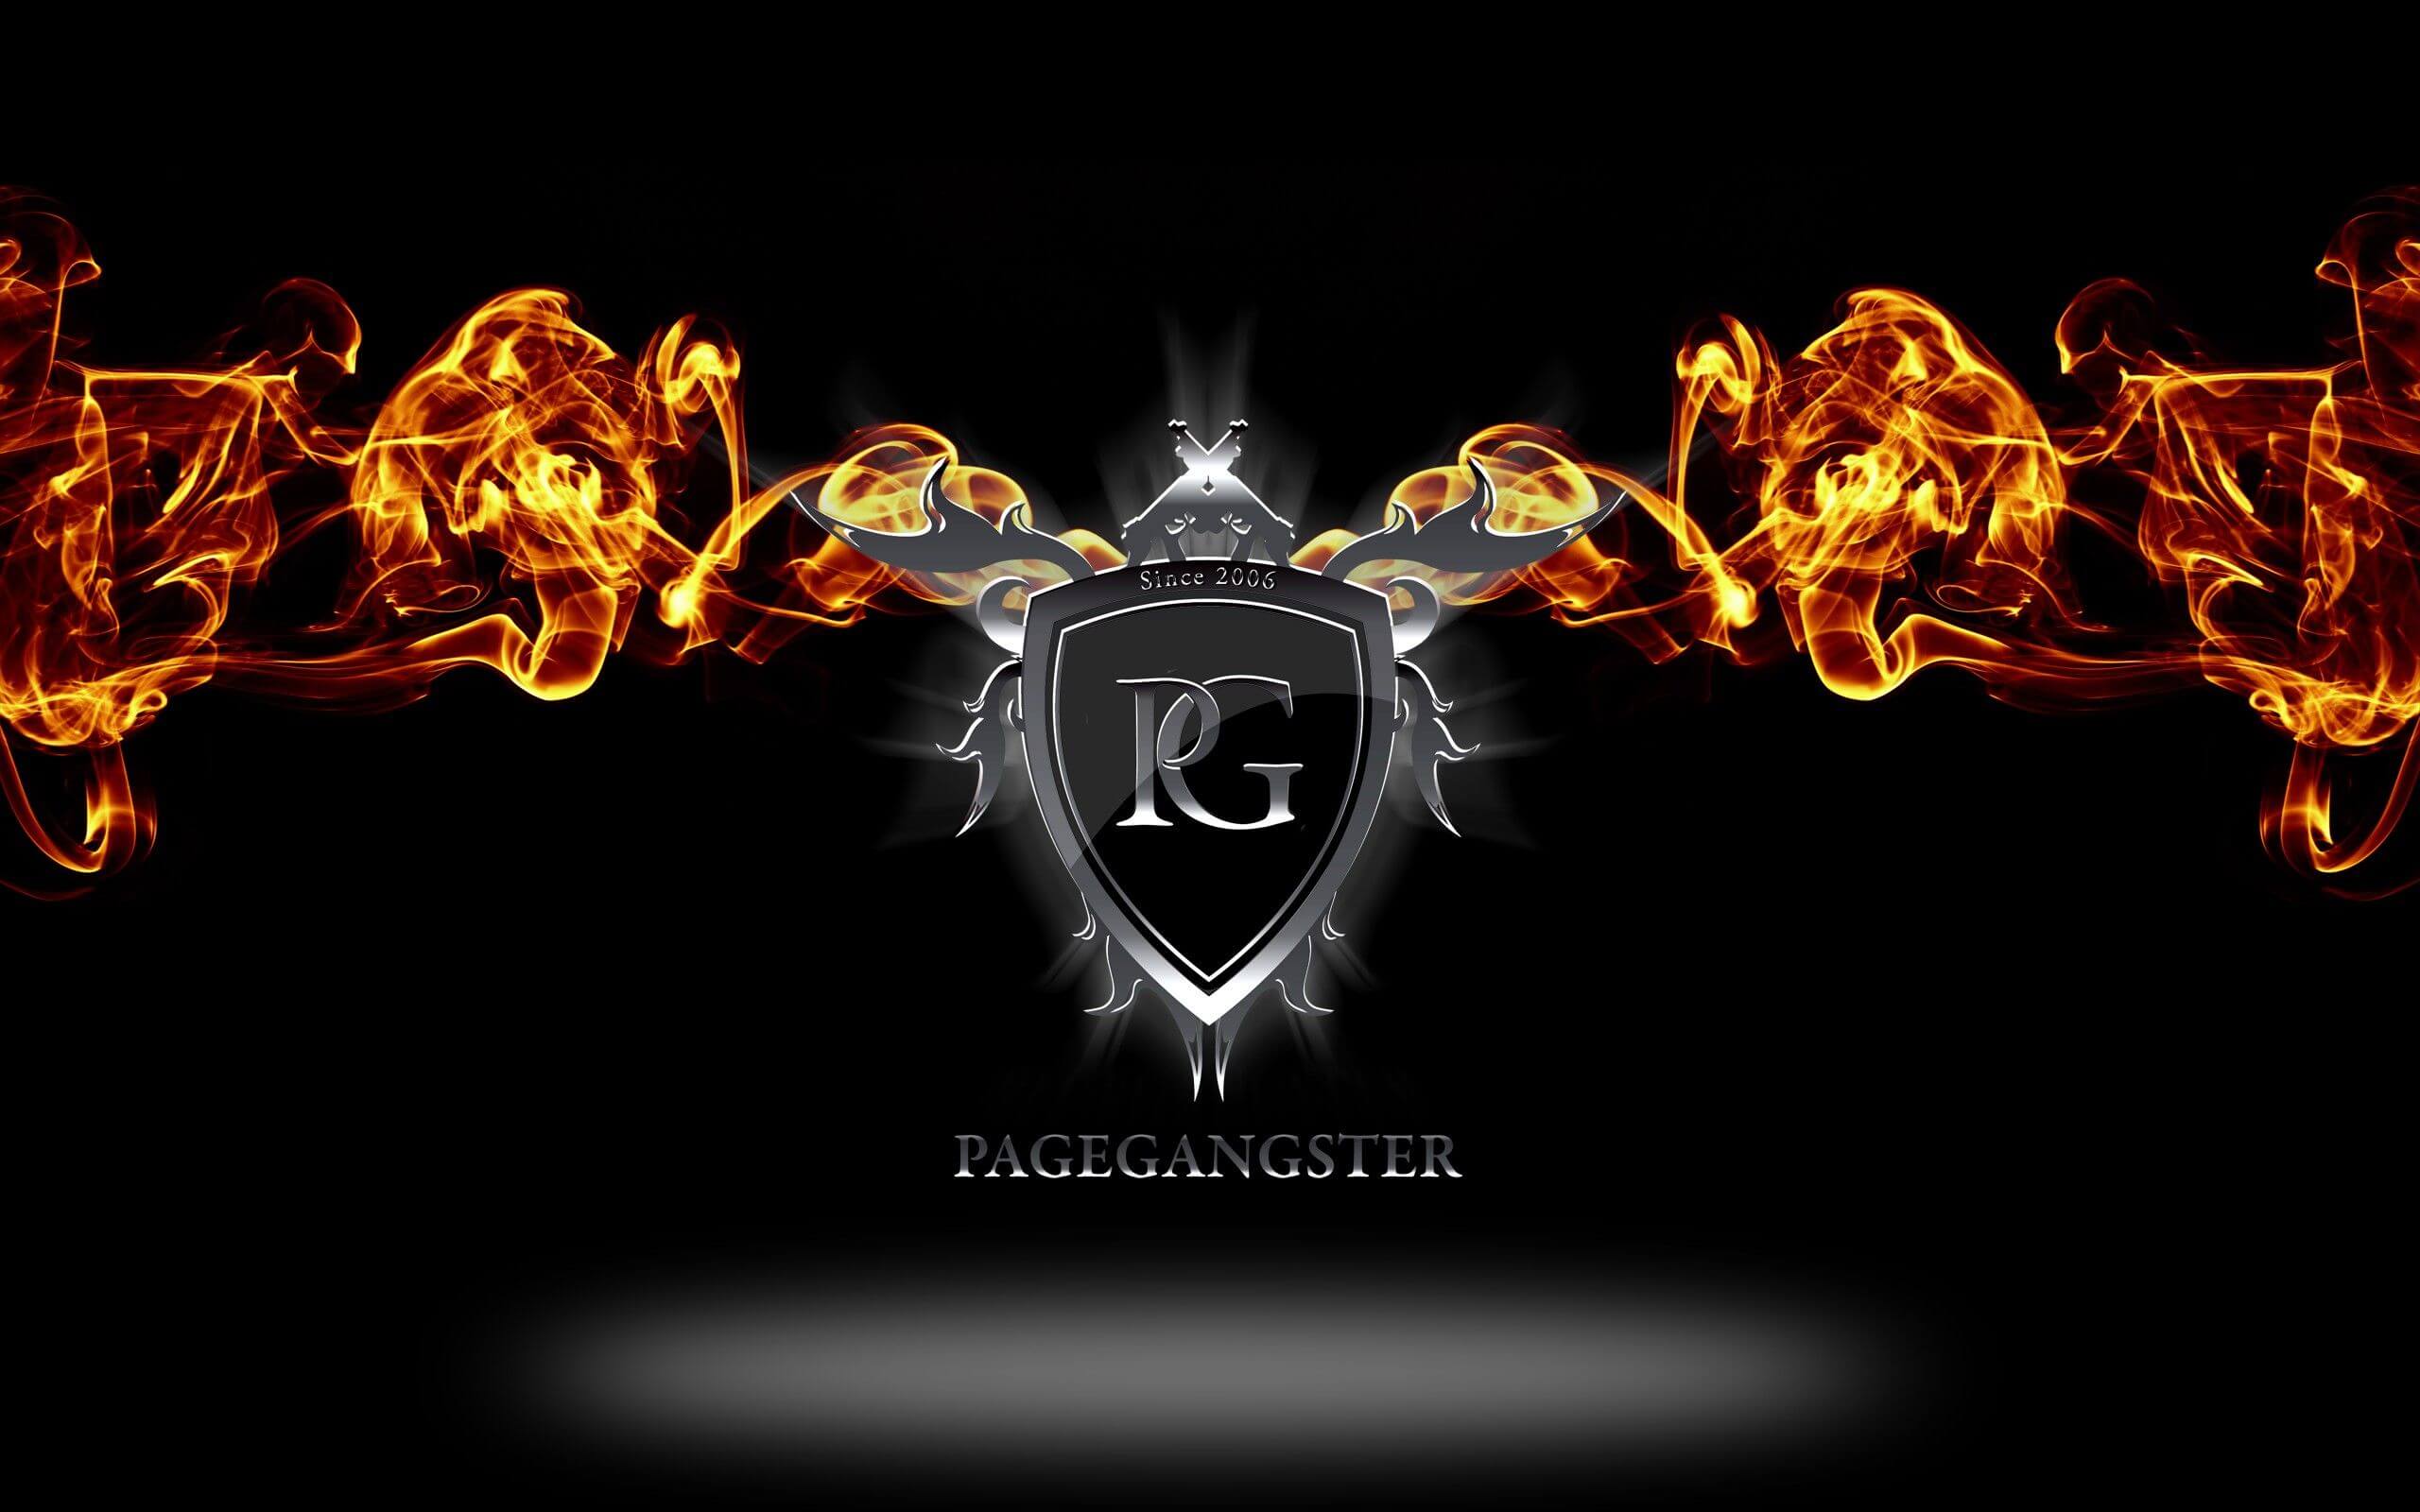 Gangsters Wallpaper, Background, Image, Picture. Design